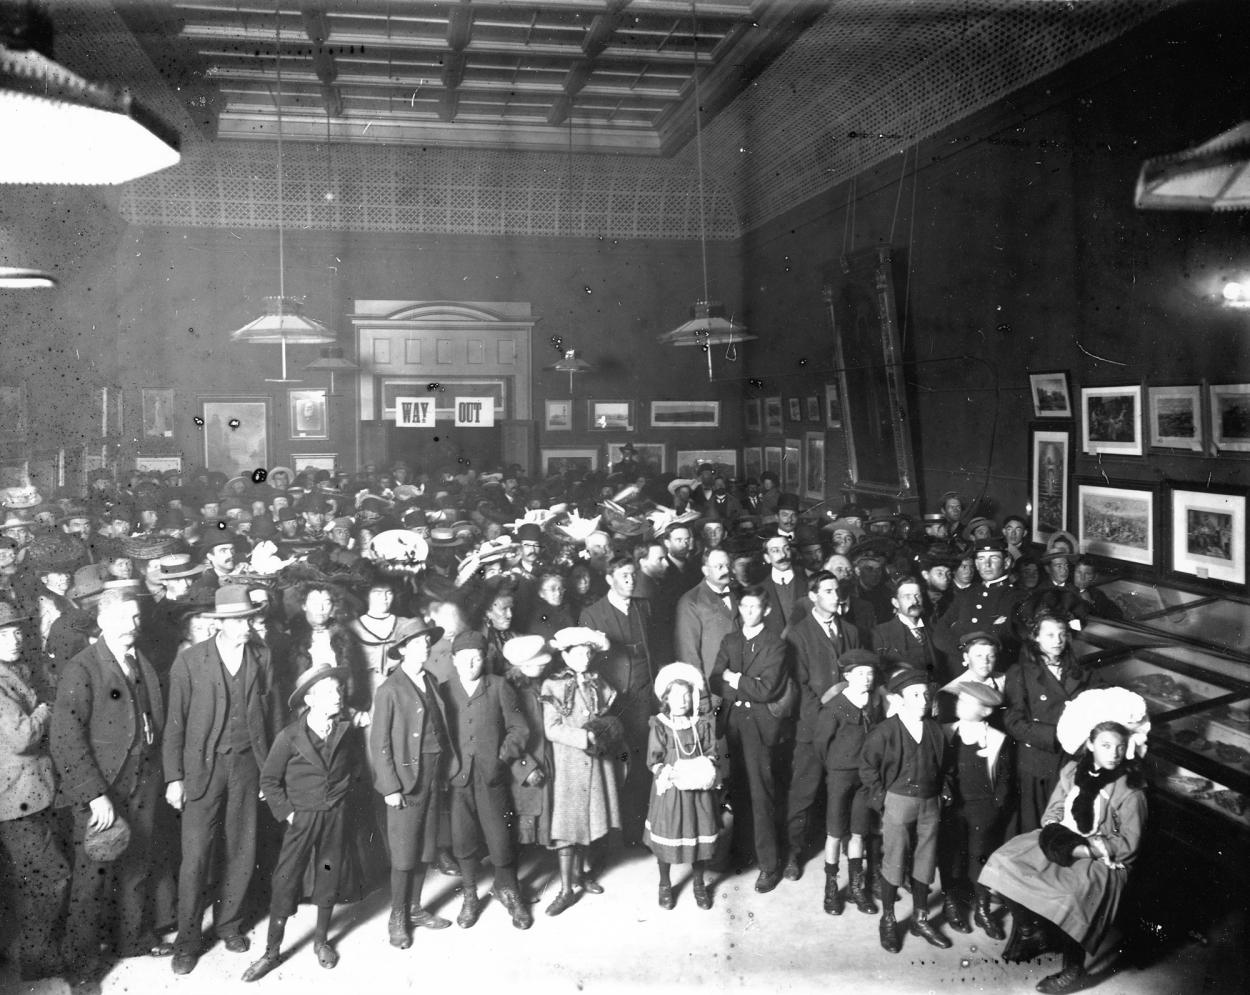 Black and white photograph of a large group of people standing in a museum gallery